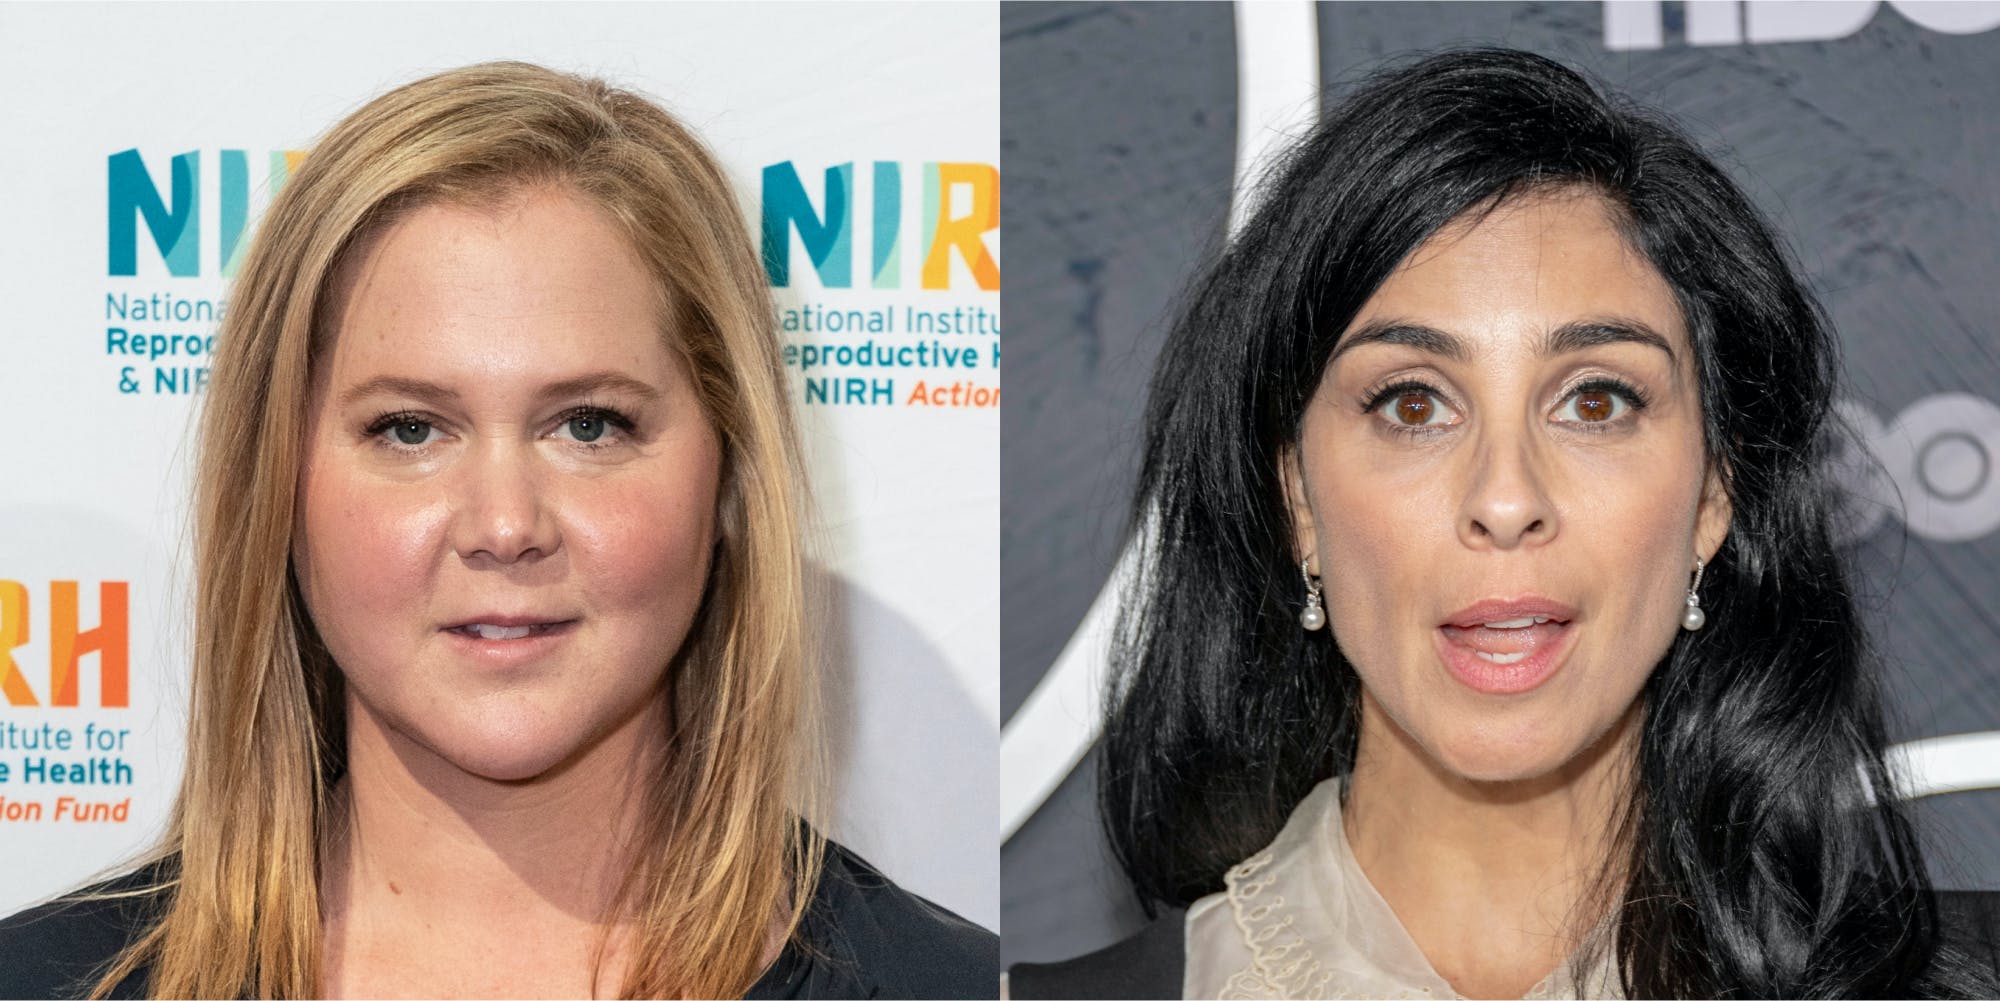 "We’ve officially reached the ‘they actually don’t deserve water and electricity’ moment": Sarah Silverman, Amy Schumer post controversial Instagram Stories